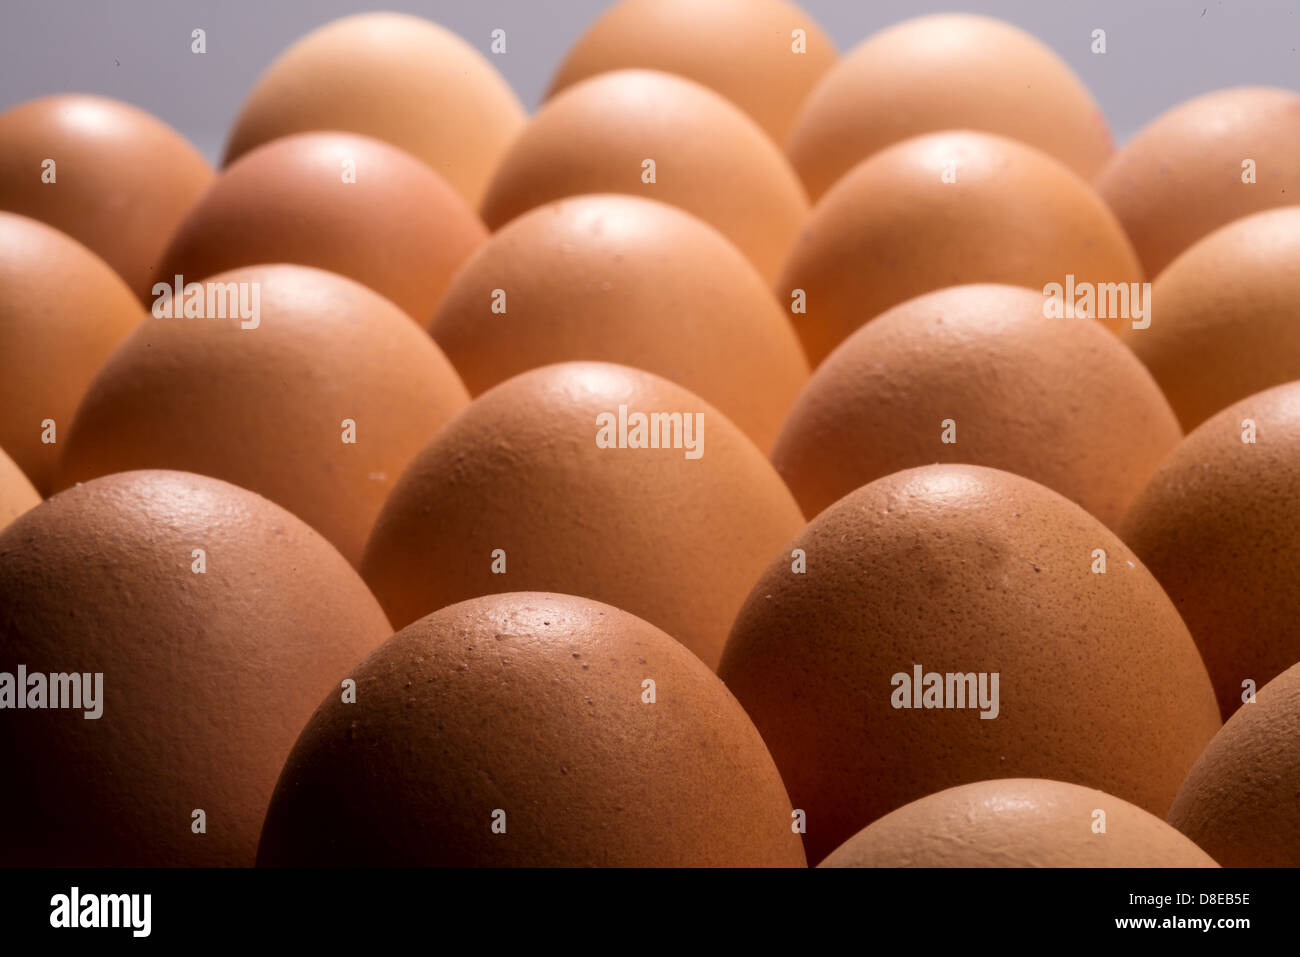 Various views of hens' eggs in a tray. Stock Photo